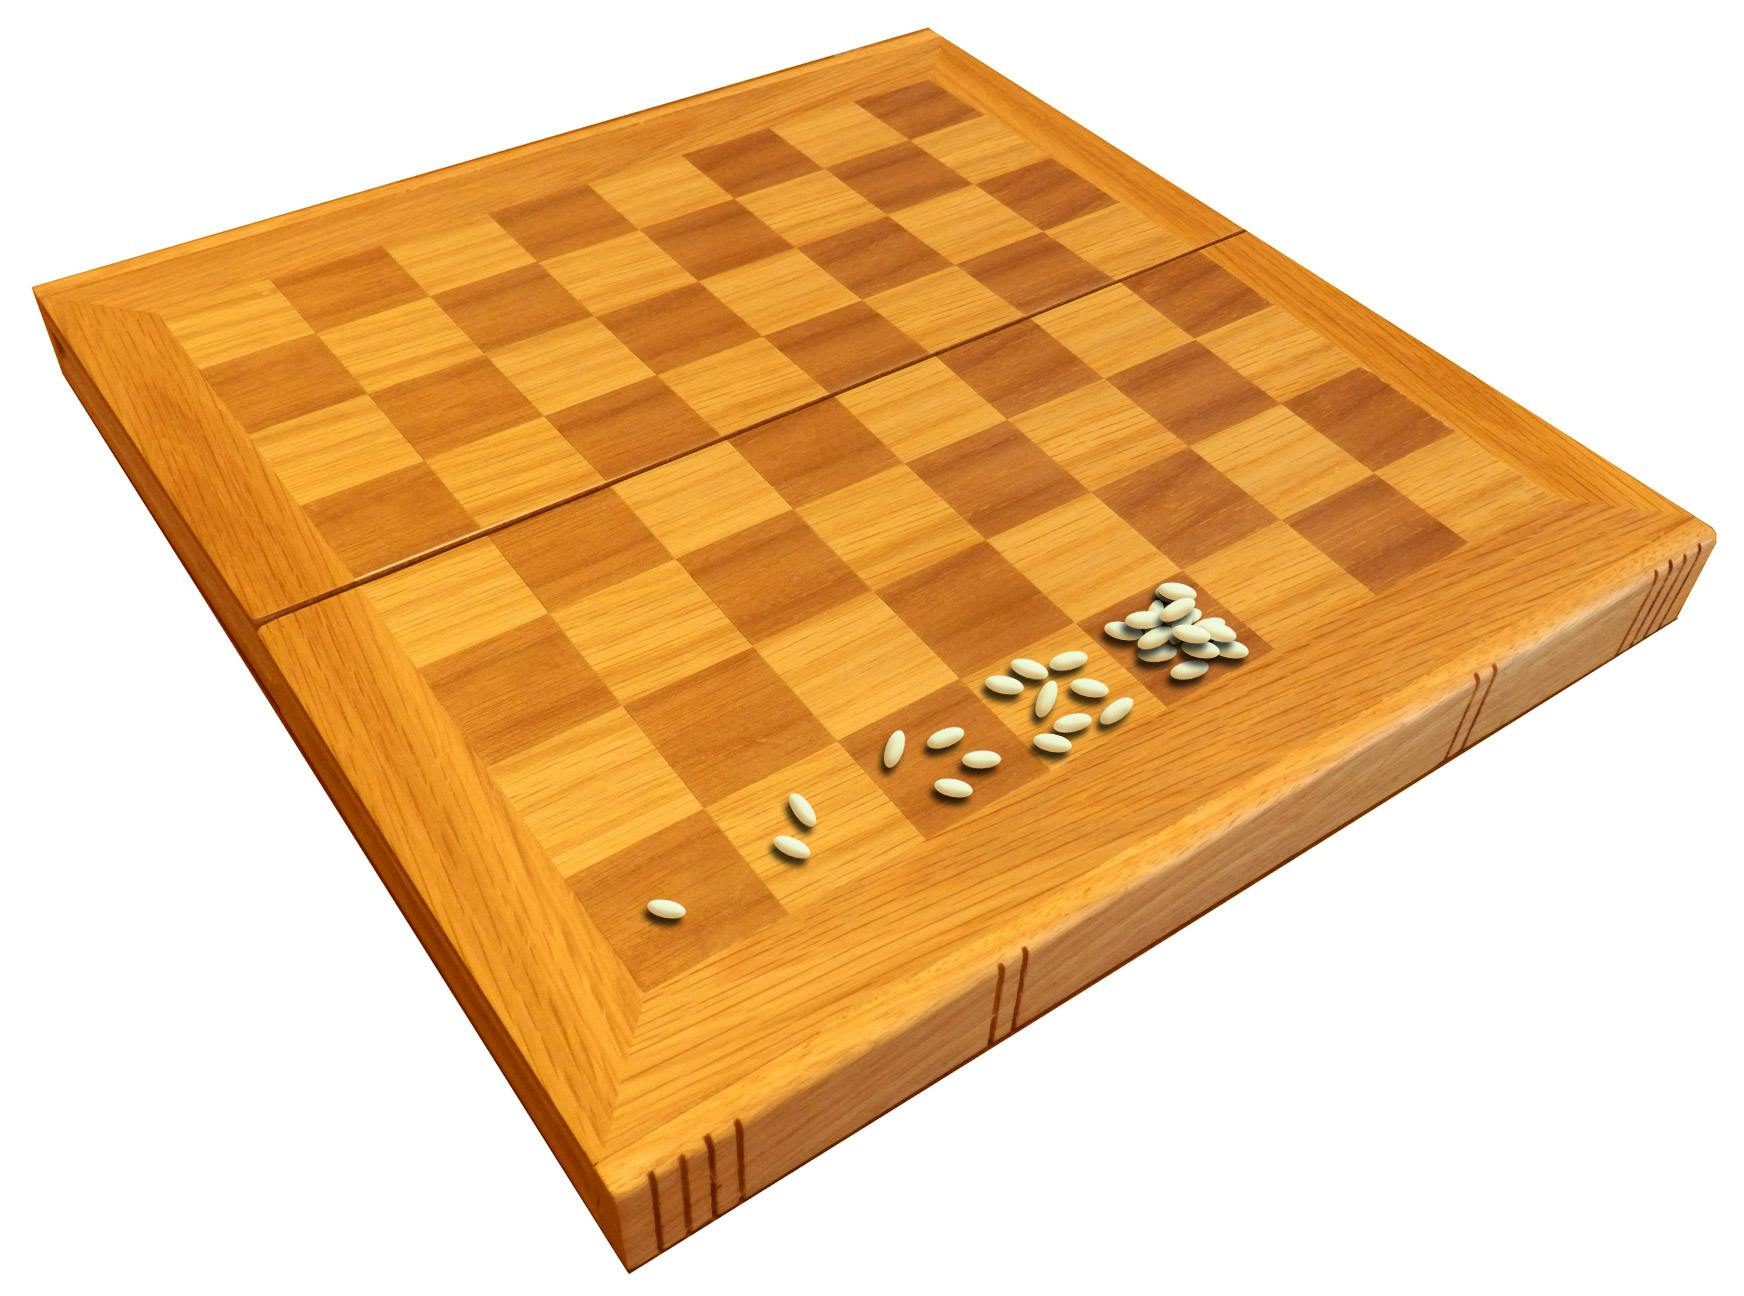 Chess board showing grains